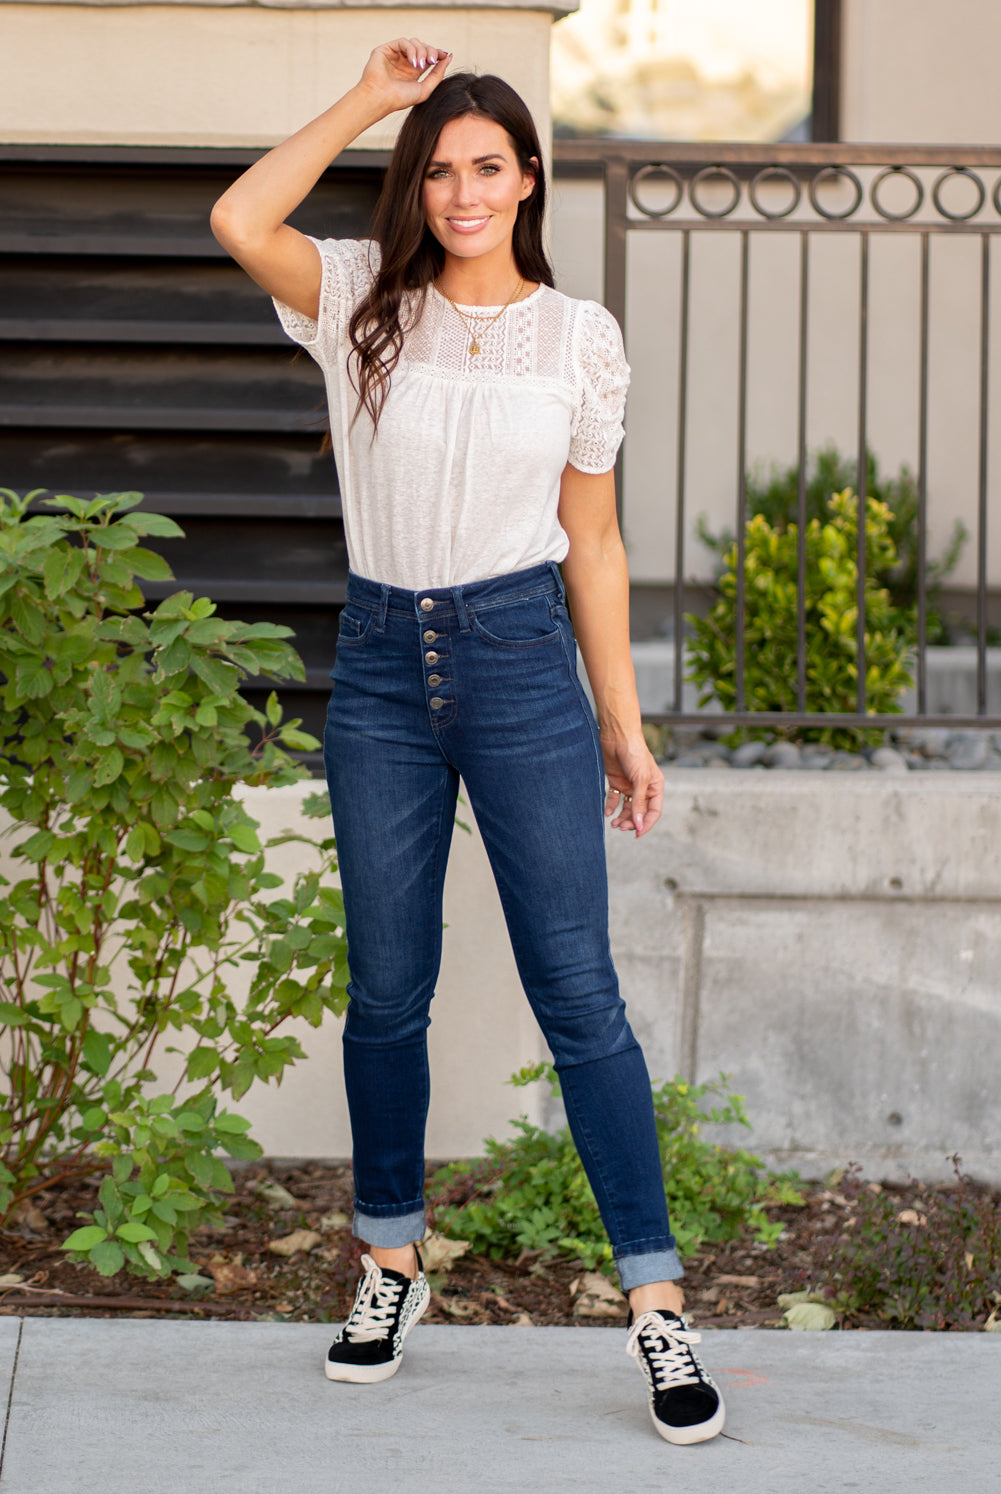 VERVET by Flying Monkey Jeans Collection: Fall 2020 Name: Plot Twist Skinny, 29" Inseam Rise: High Rise, 10" Front Rise 90.5% COTTON, 7.5% POLYESTER, 2% SPANDEX Machine Wash Separately In Cold Water Stitching: Classic Fly: Zipper Style #: VT1186 Contact us for any additional measurements or sizing.  Chloe is 5’8" and 130 pounds. She wears a size 3 in jeans, a small top and 8.5 in shoes. She wearing a size 26/3 in these jeans.